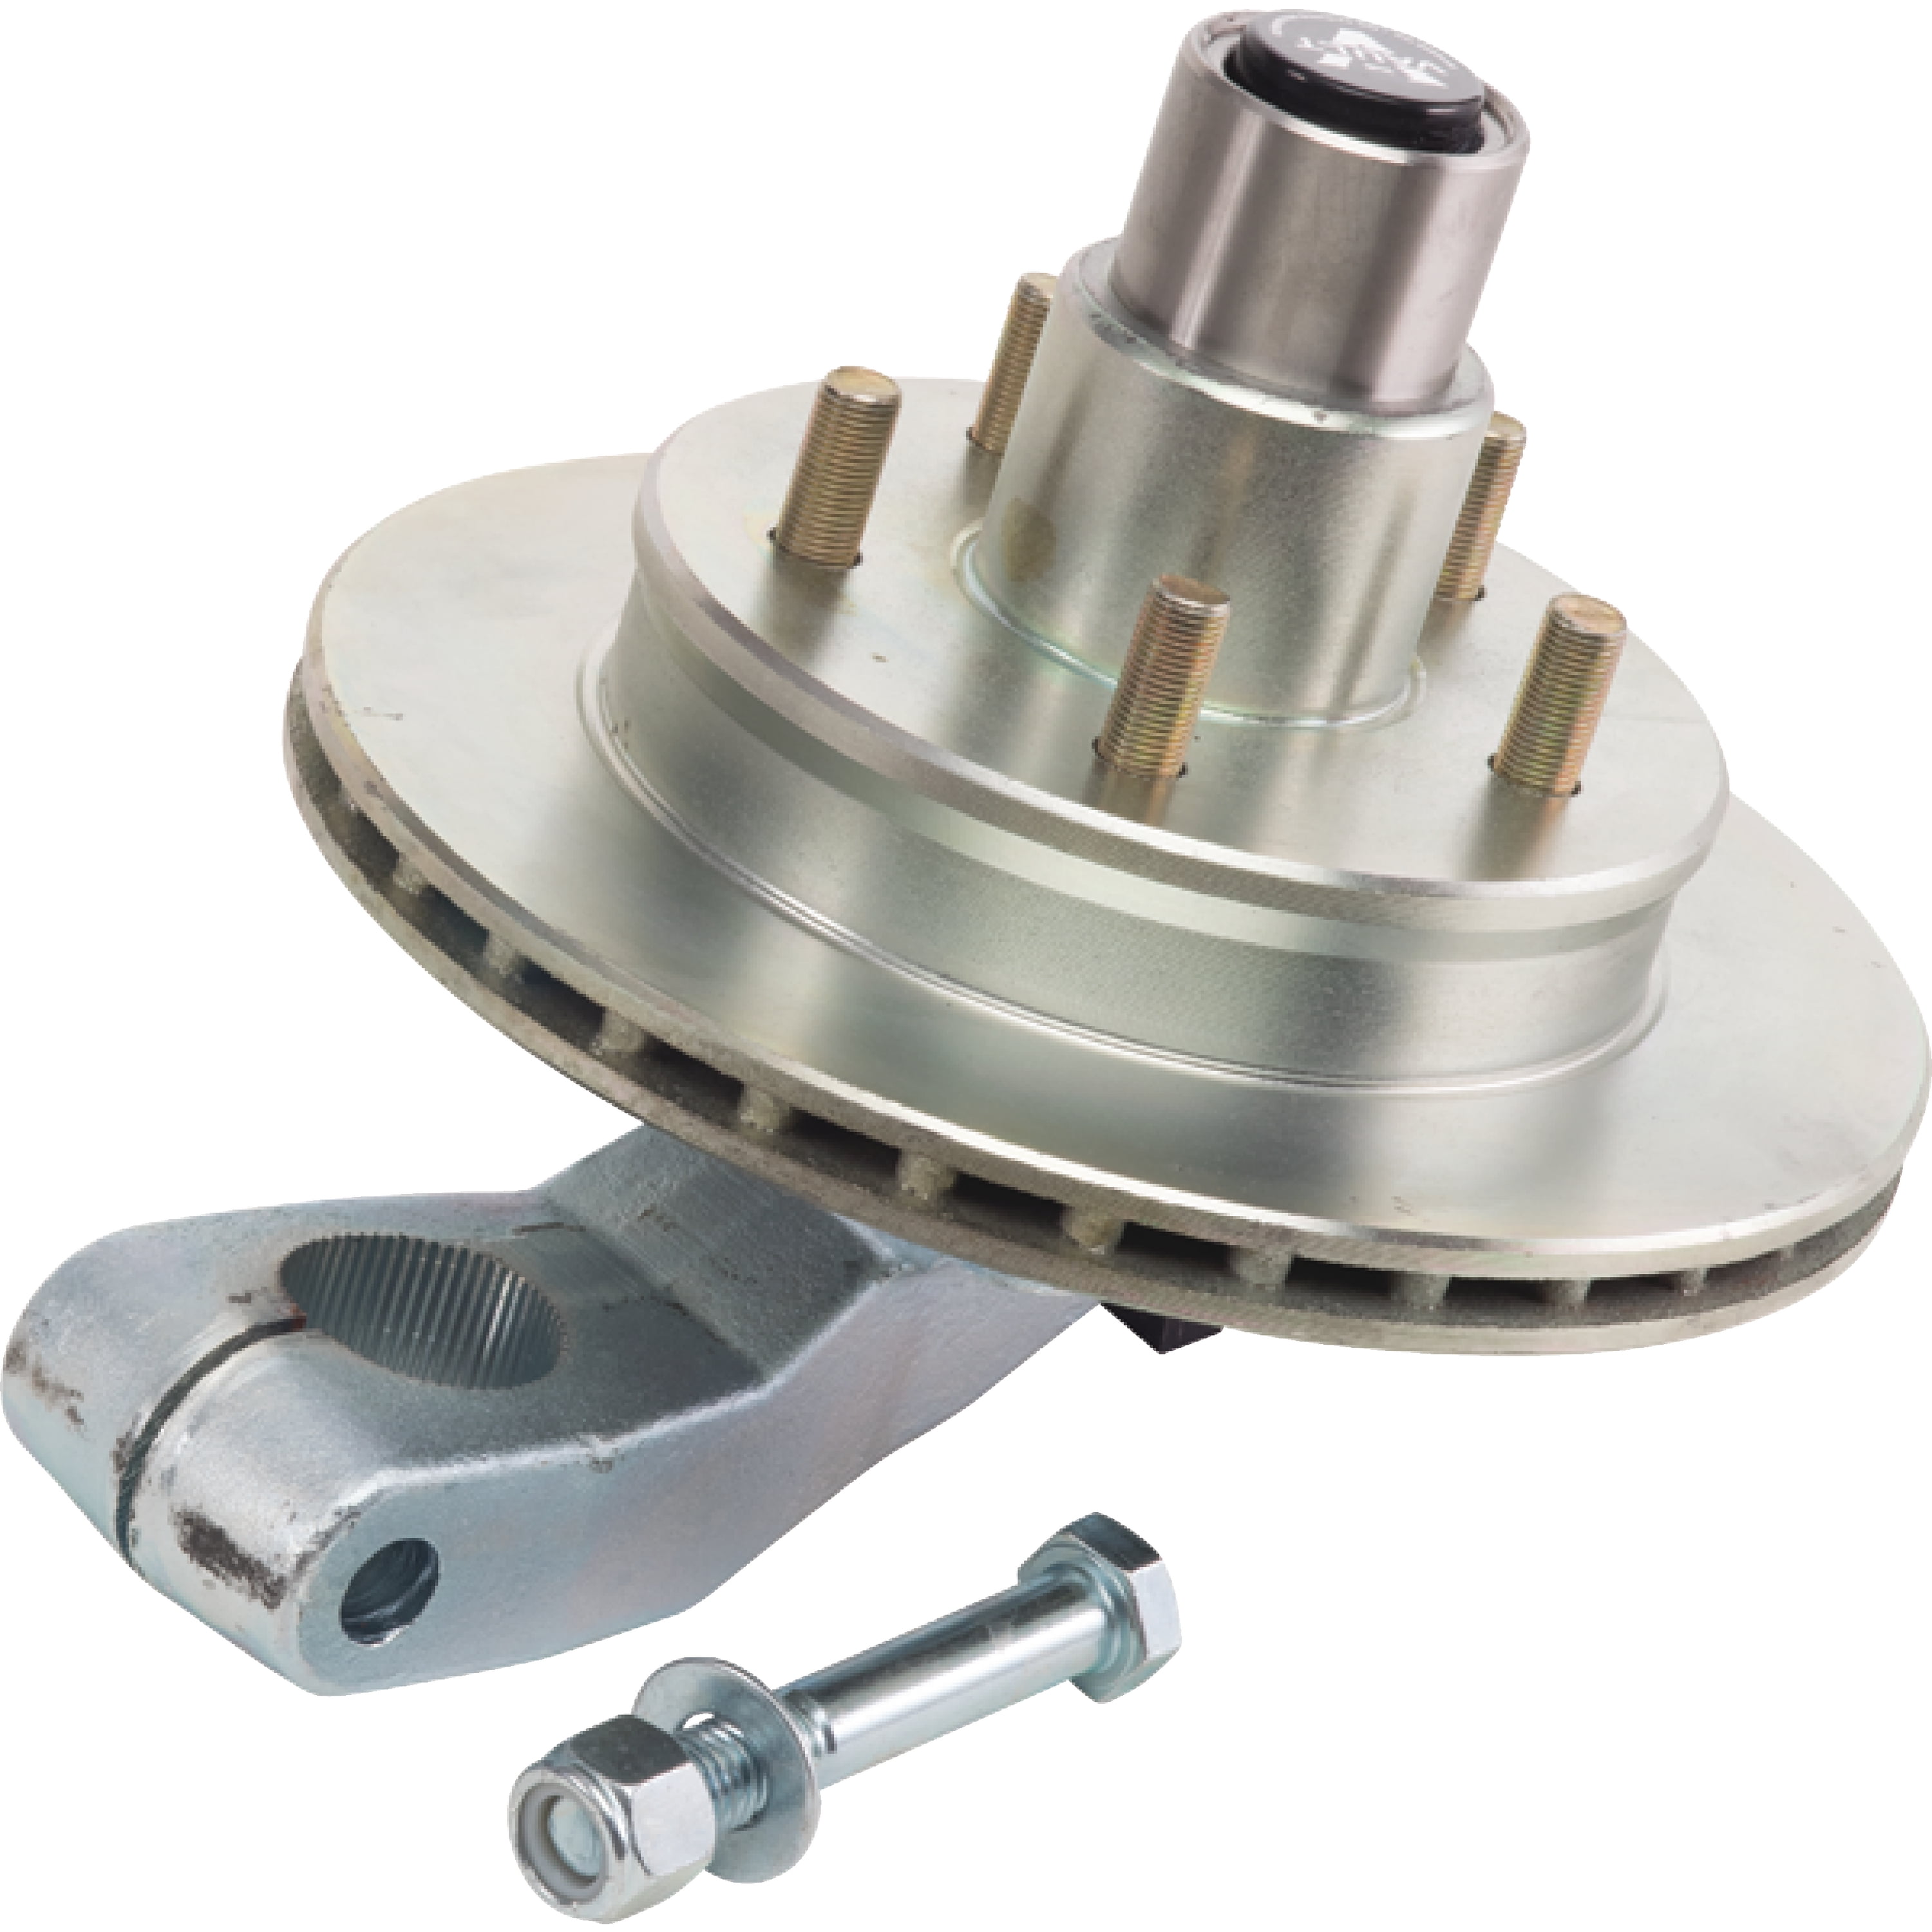 UFP K71-071-00 Axle Complete 3.7K 545 Zinc Hub and Rotor with Vault Torsion  Arm Kit